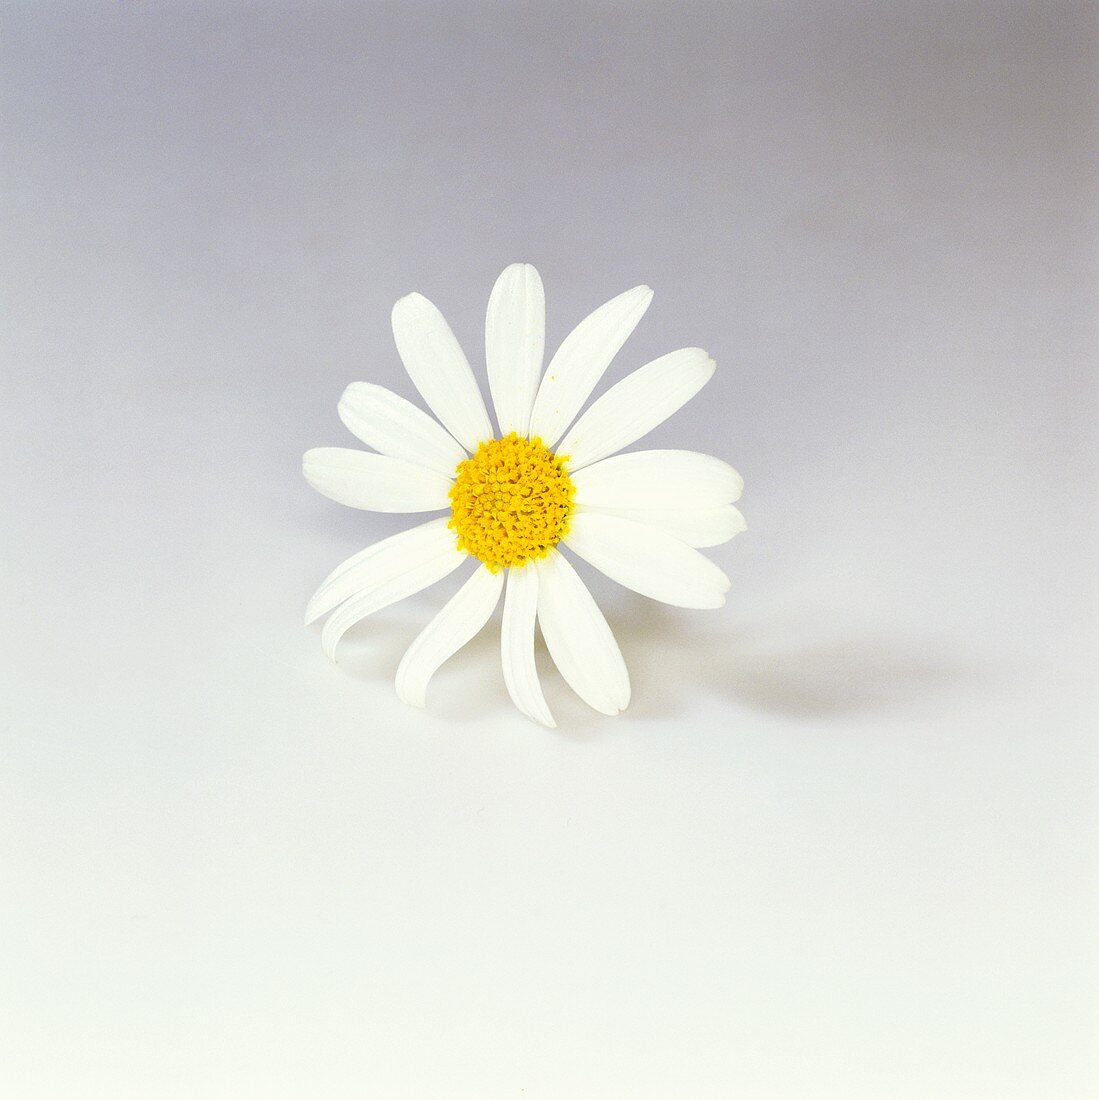 A marguerite flower on a light background